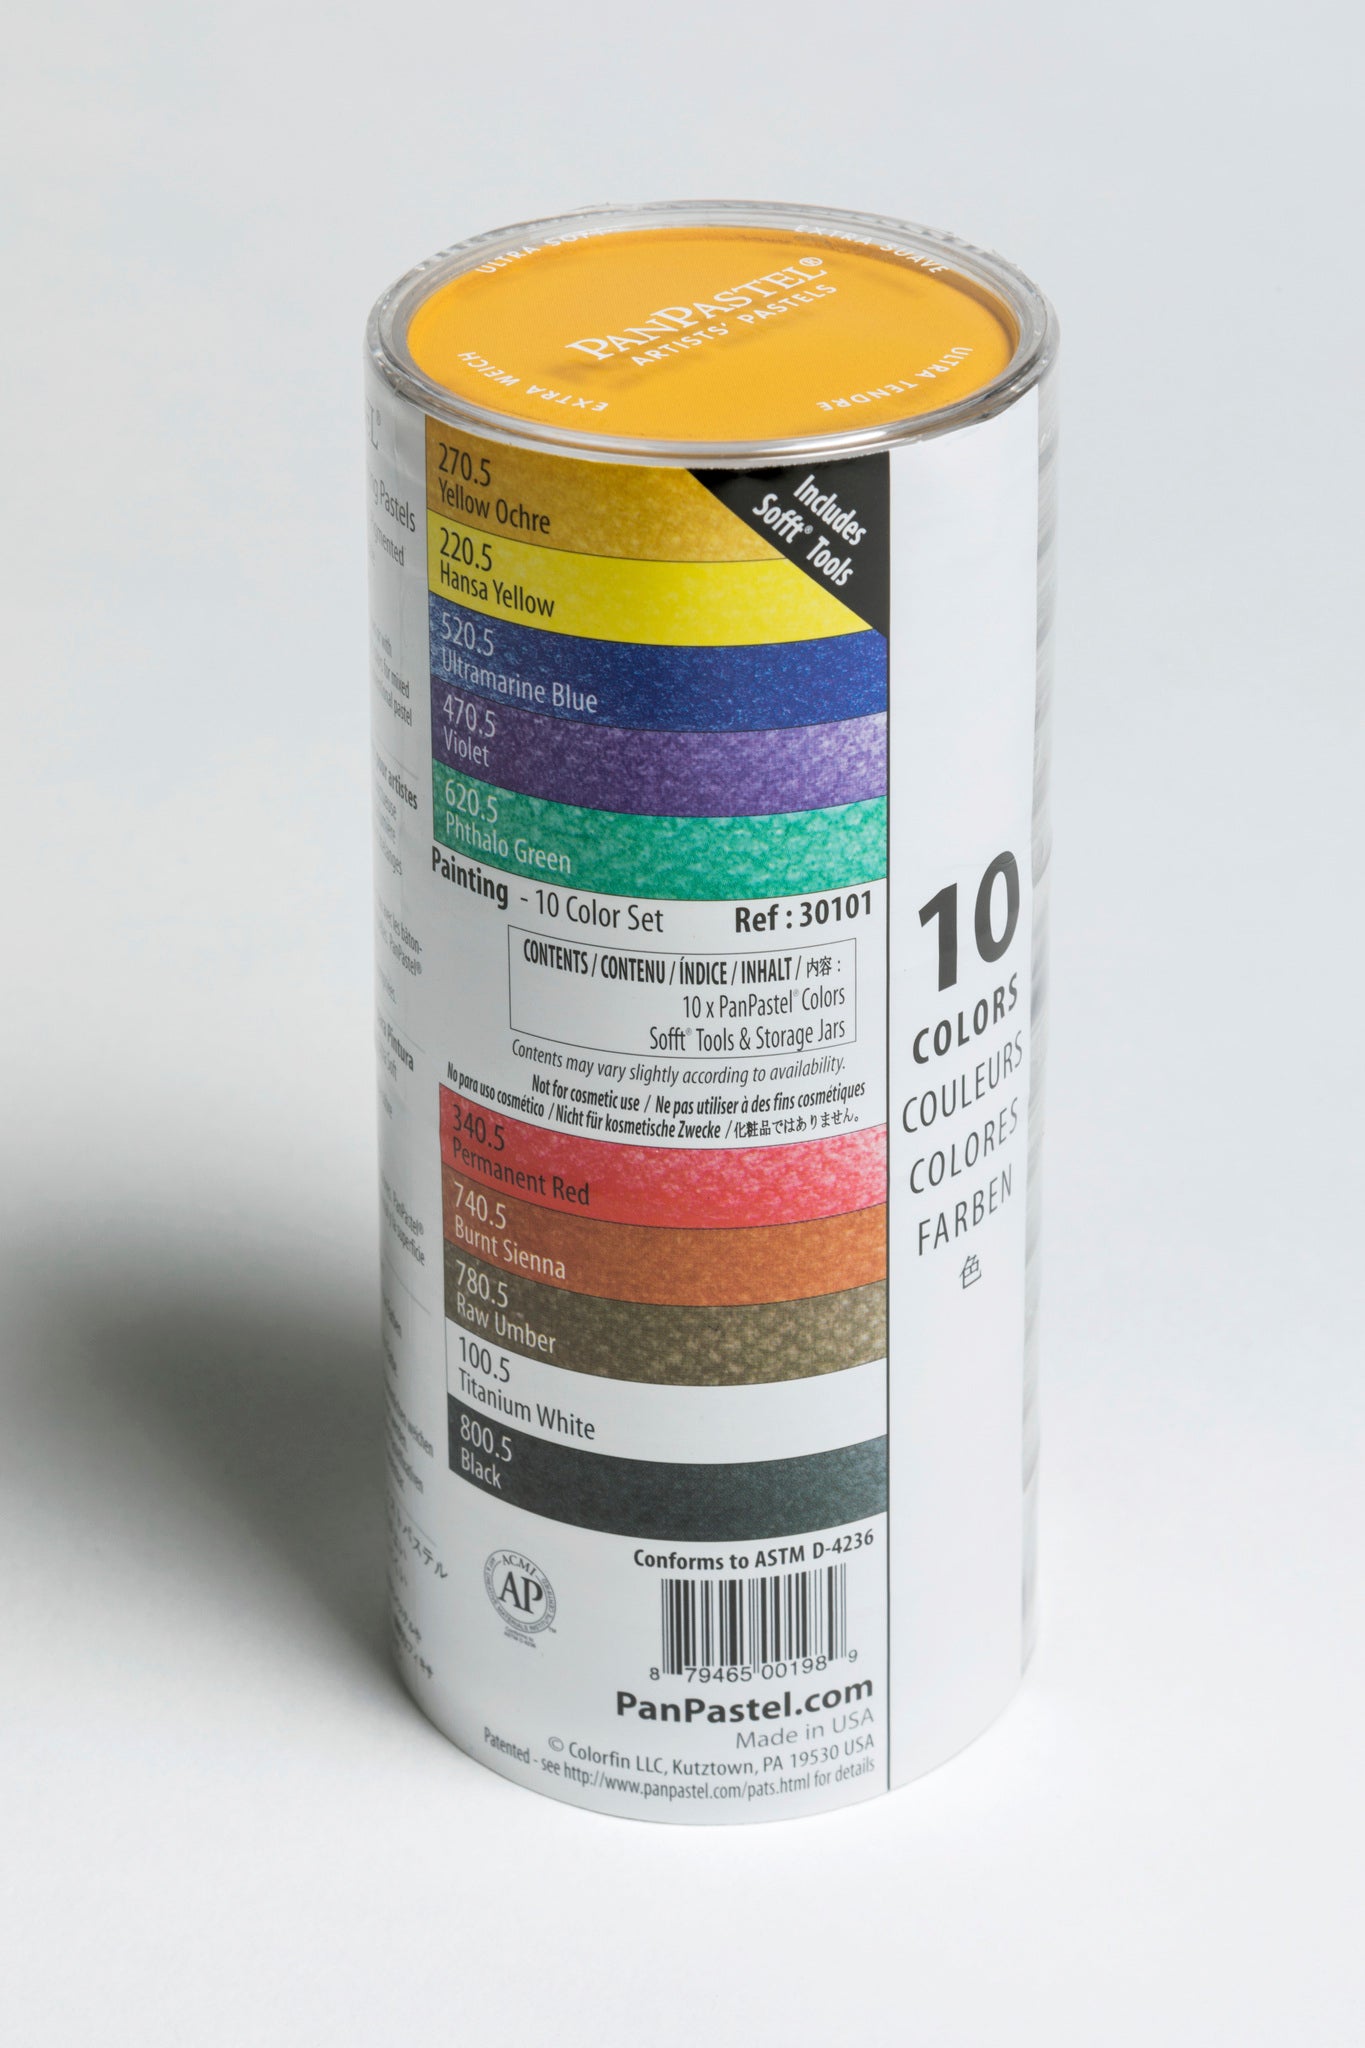 PanPastel 10 Colour Painting set 30101 & Sofft Tools, this is a great colour combination set, includes essential primary colours, plus black and white for tinting and tone, as well as a selection of complementary colours that work well for all subjects and backgrounds